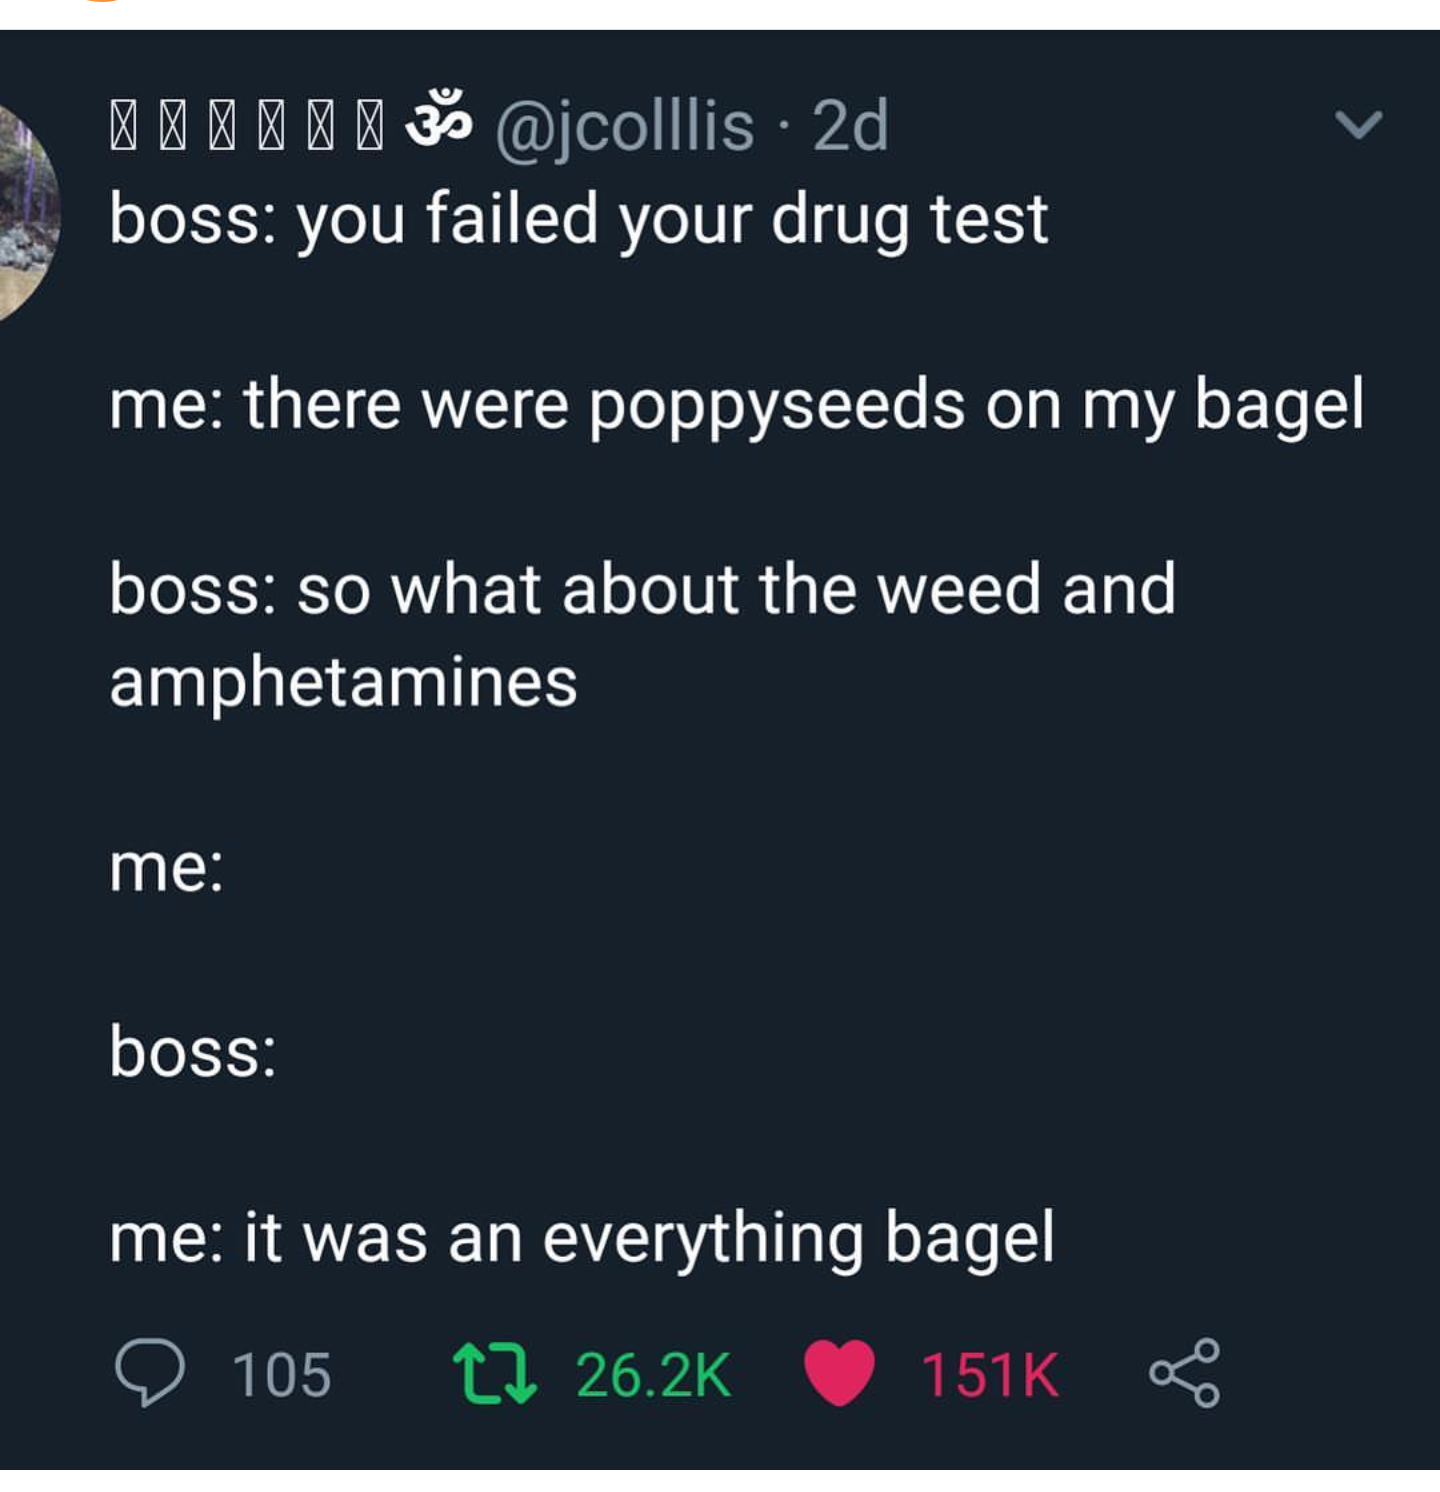 screenshot - | 33 2d boss you failed your drug test me there were poppyseeds on my bagel boss so what about the weed and amphetamines me boss me it was an everything bagel 2105